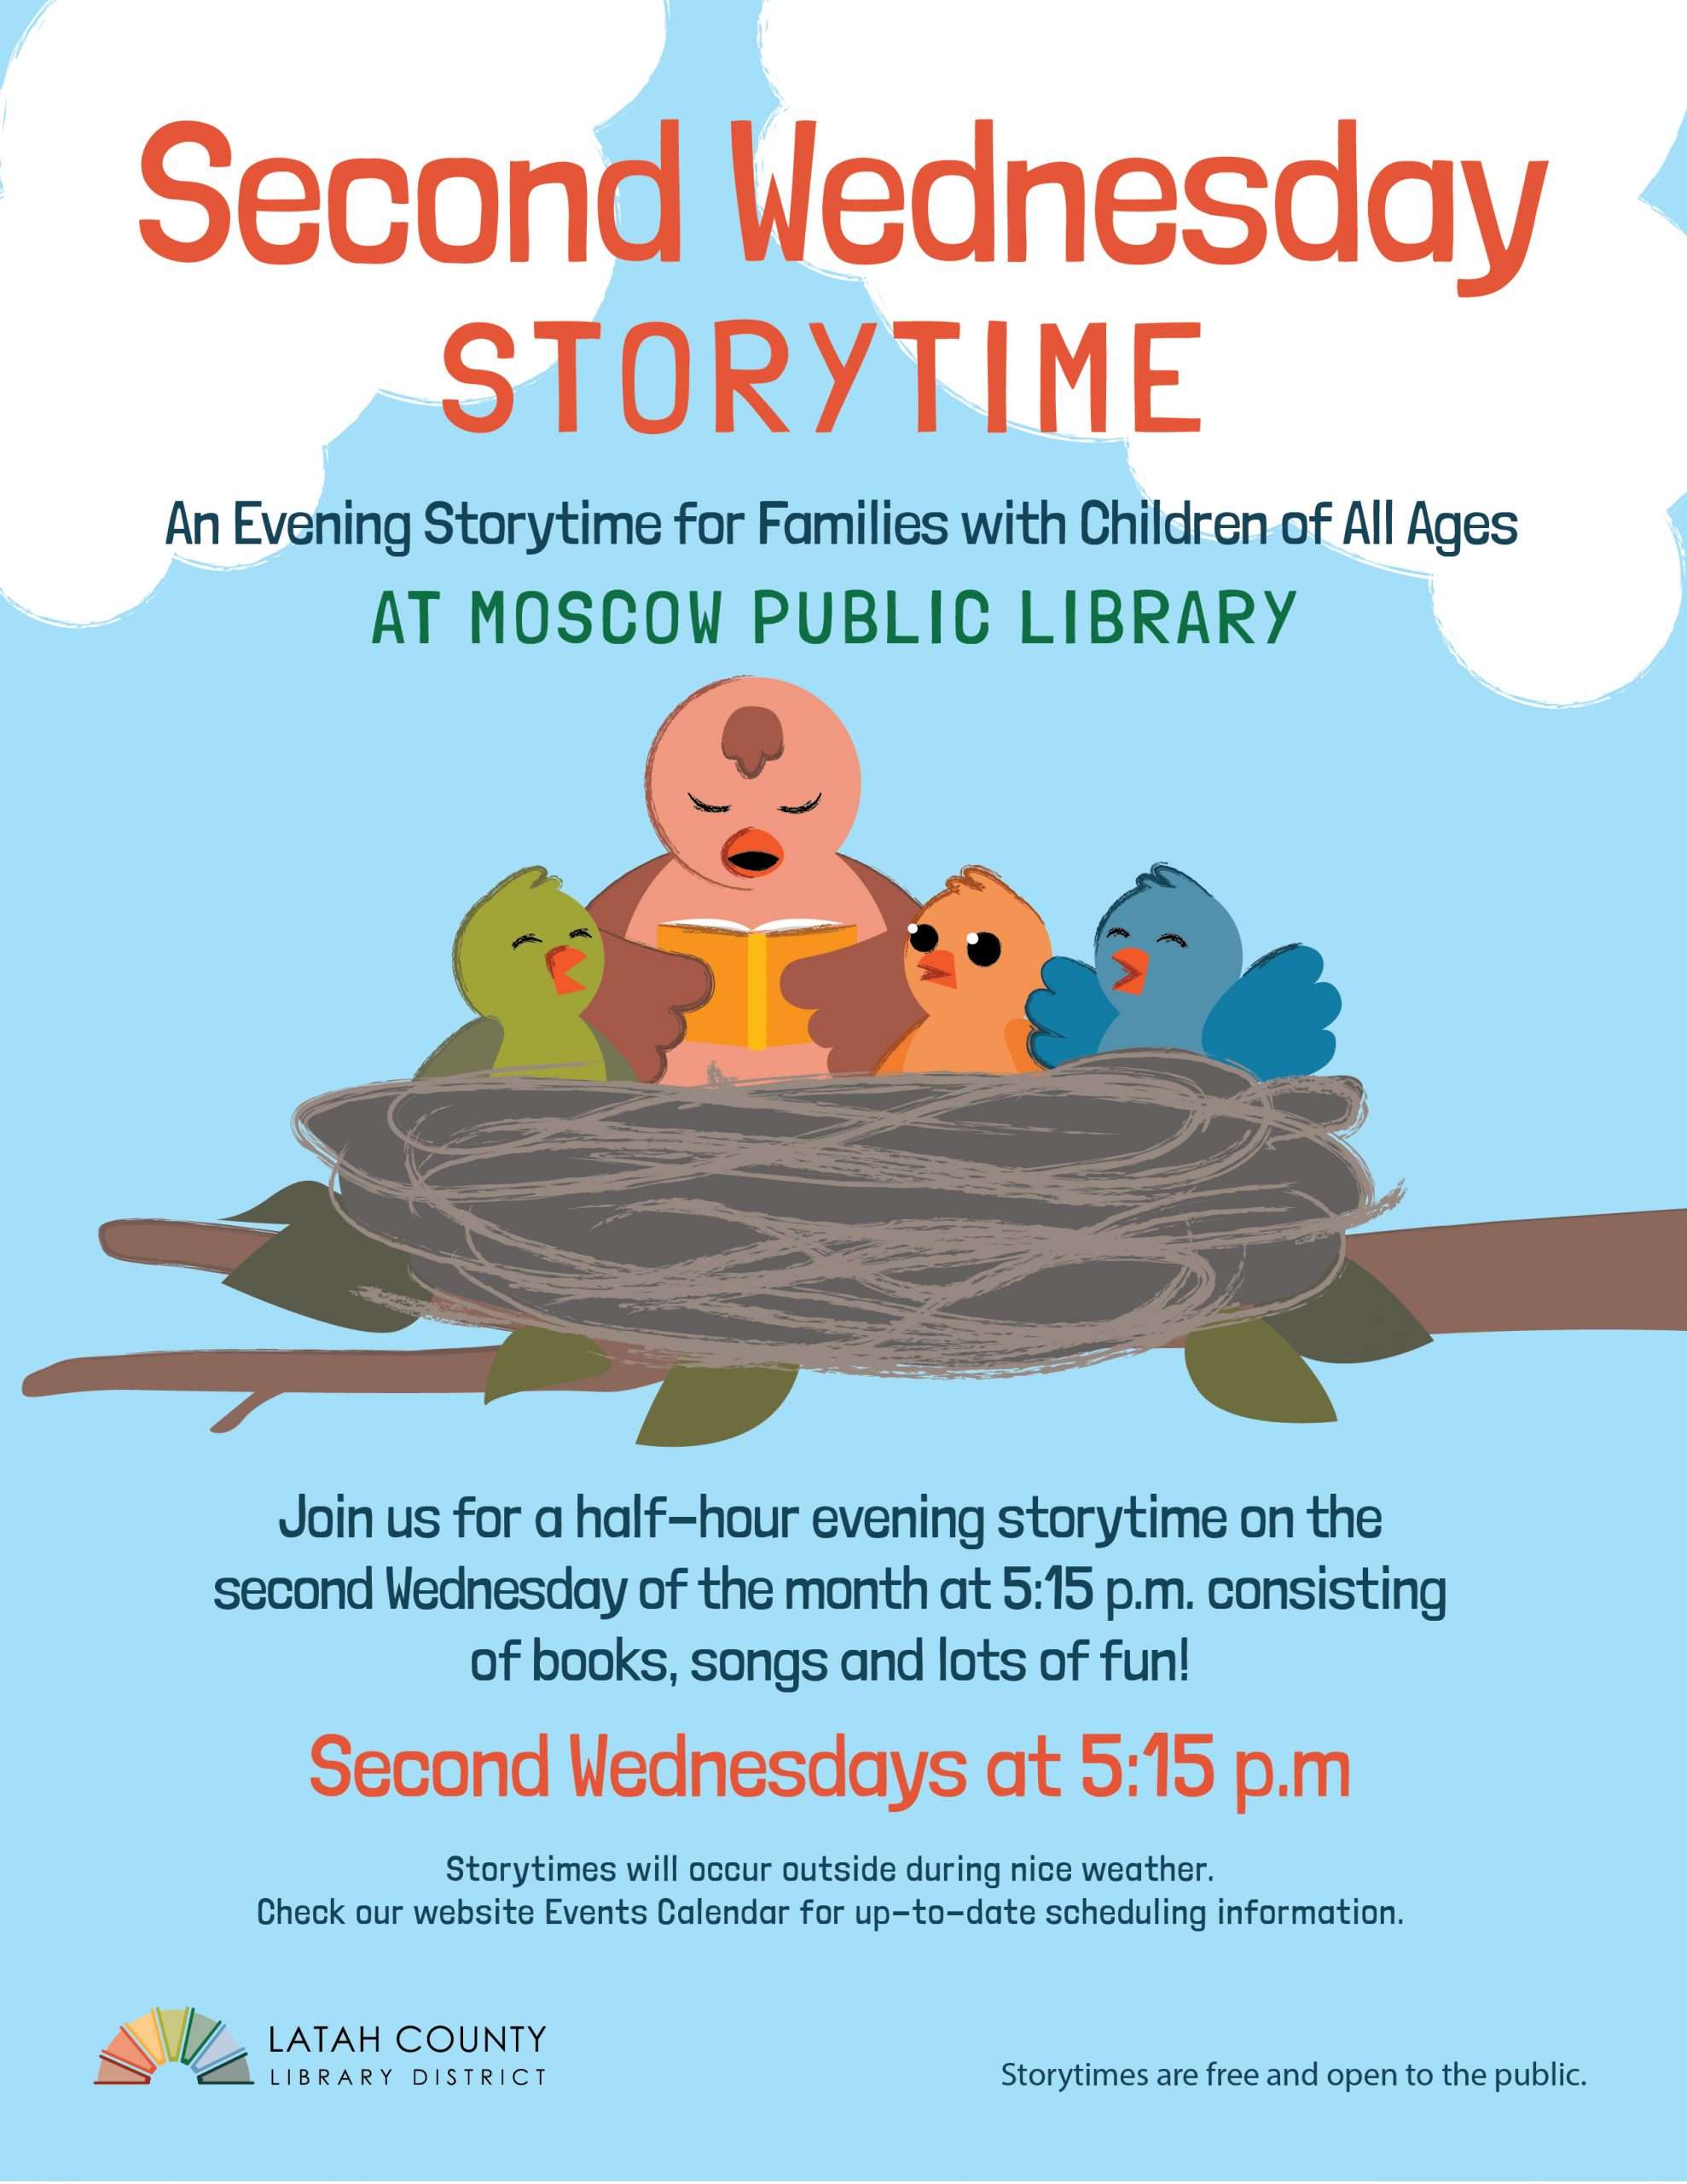 Second Wednesday Storytime